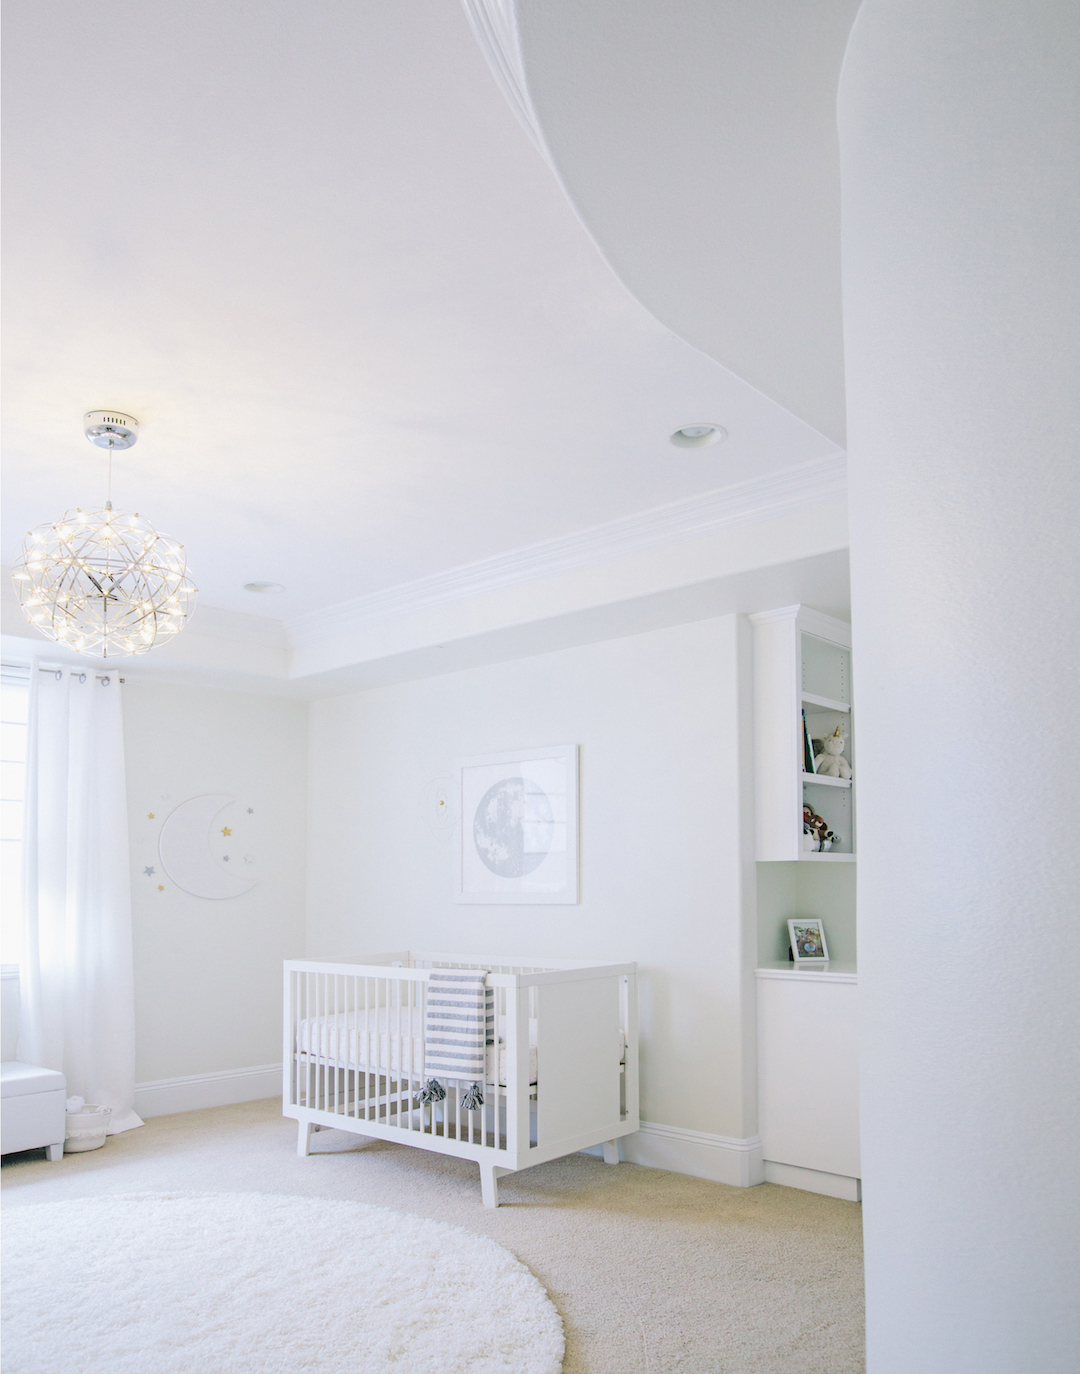 All White Celestial Nursery Design by Little Crown Interiors